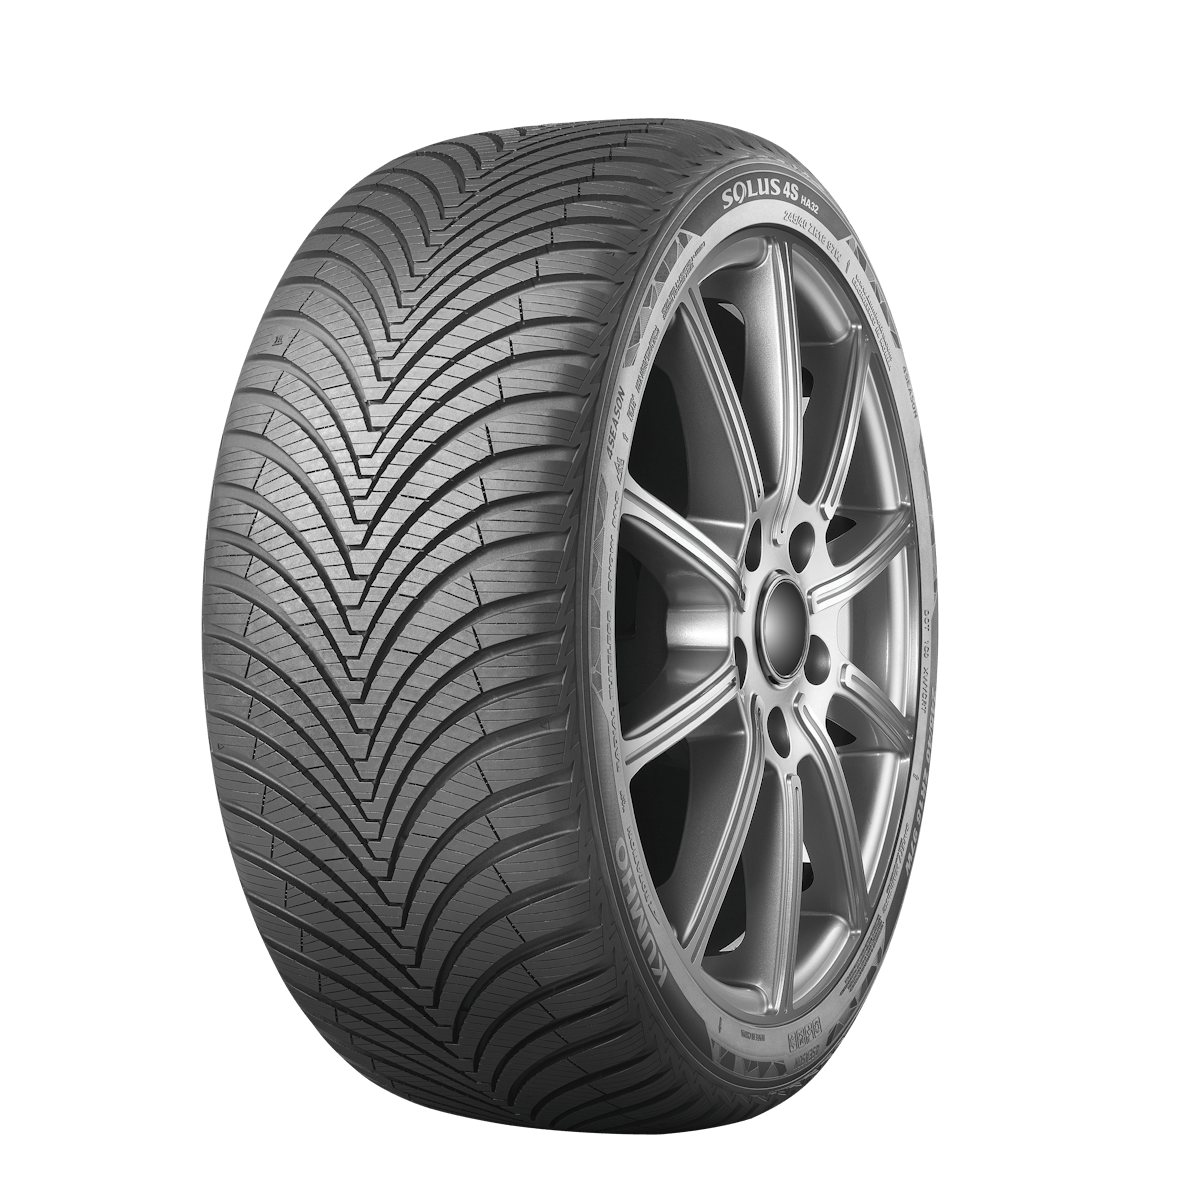 The tire will be available Jan. 1, 2024, in 26 sizes ranging from 15-inches to 19-inches in rim sizes.